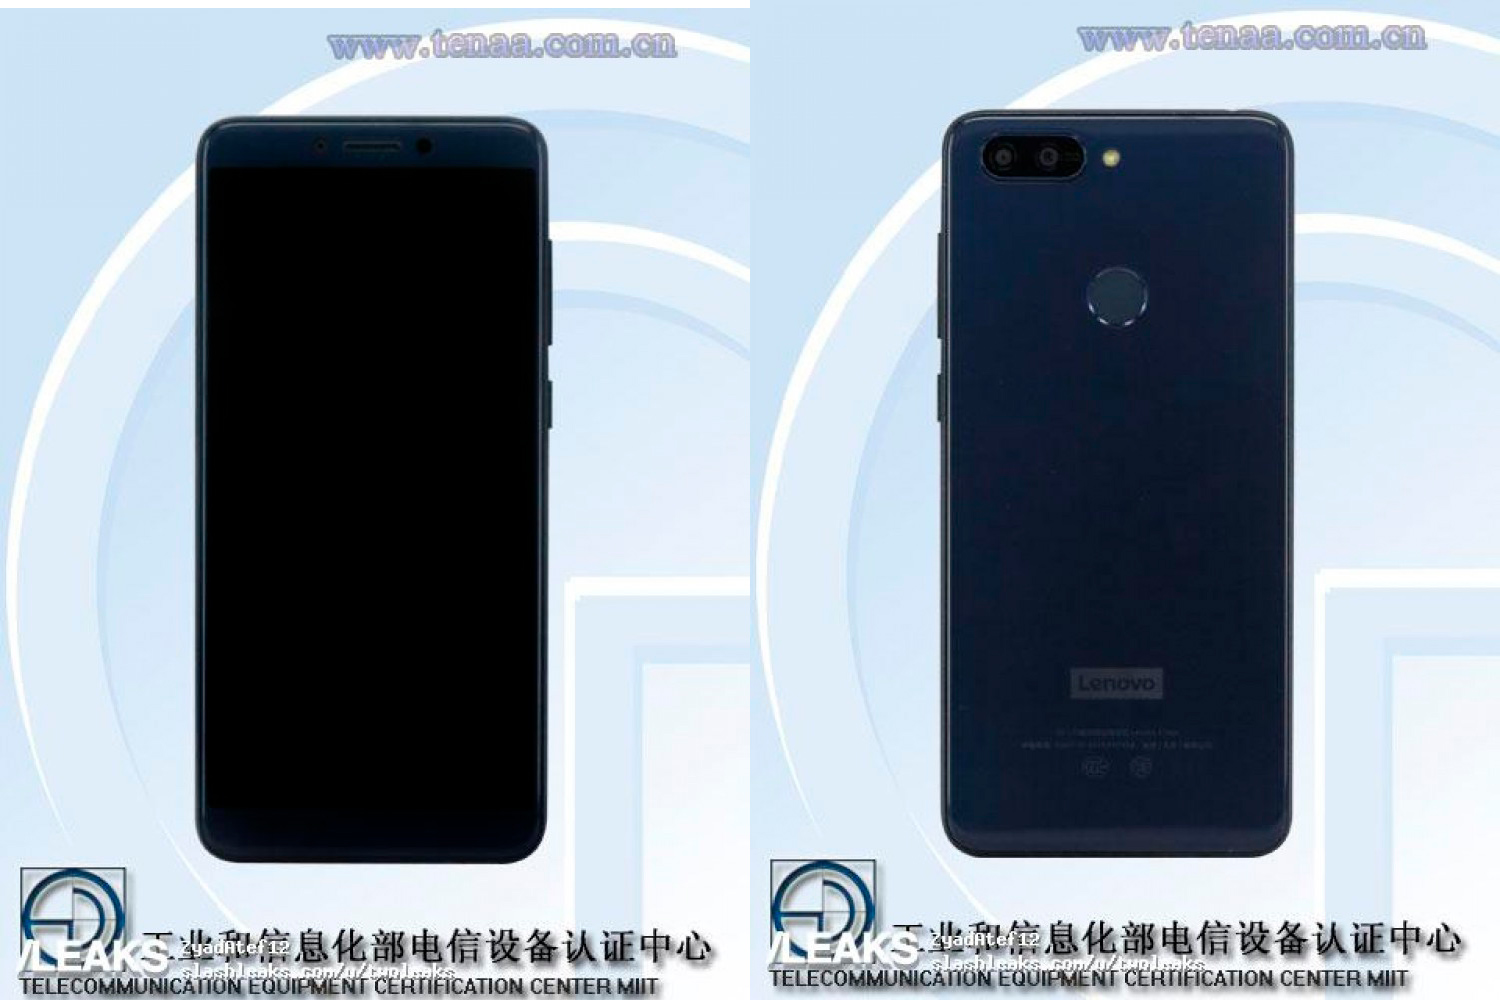 In the TENAA appeared budget Lenovo K350 with a dual camera